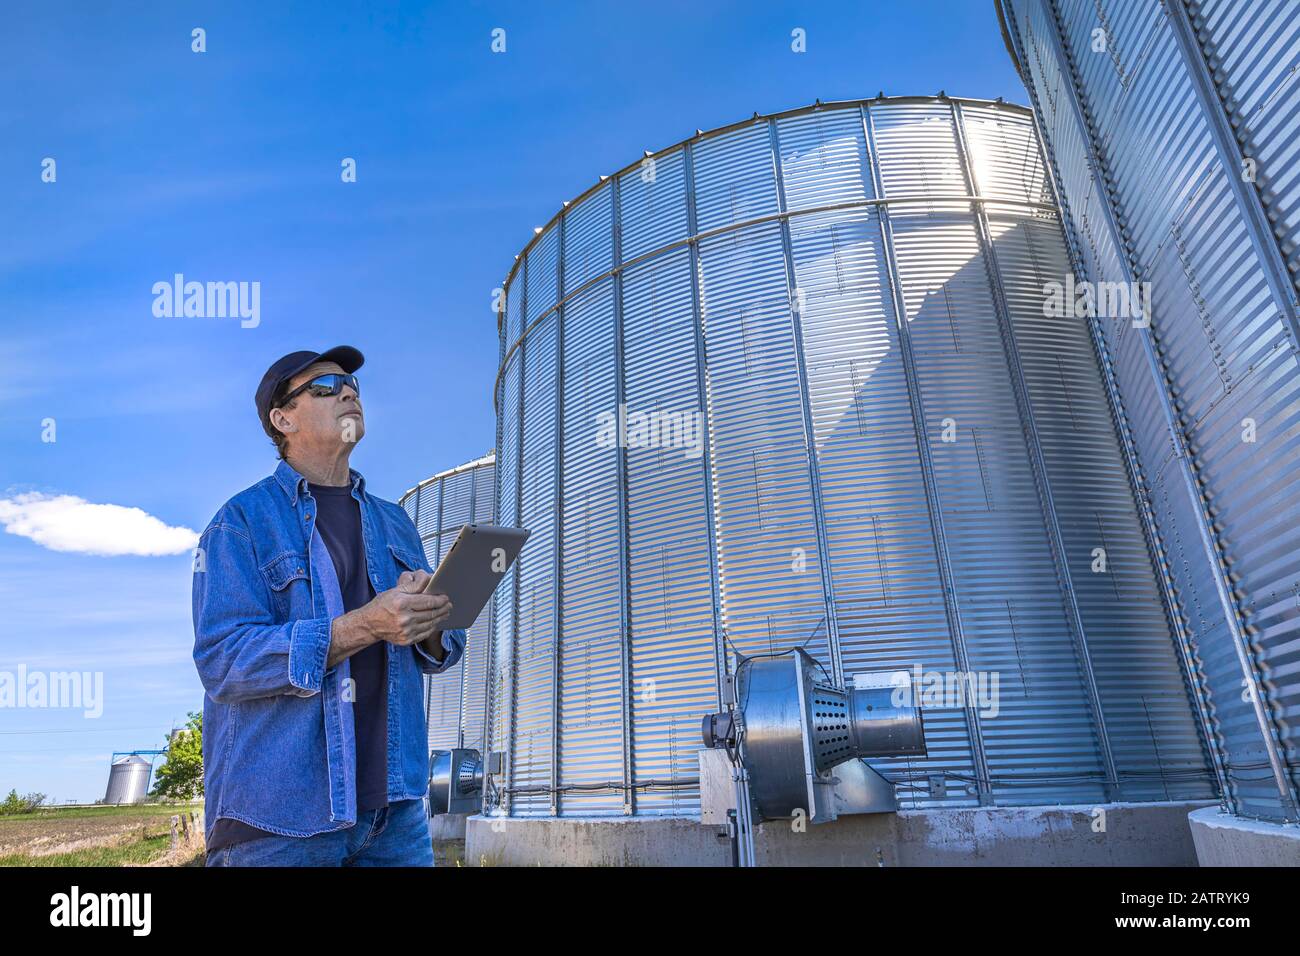 A farmer stands using a tablet while standing beside and looking up at grain storage bins; Alberta, Canada Stock Photo